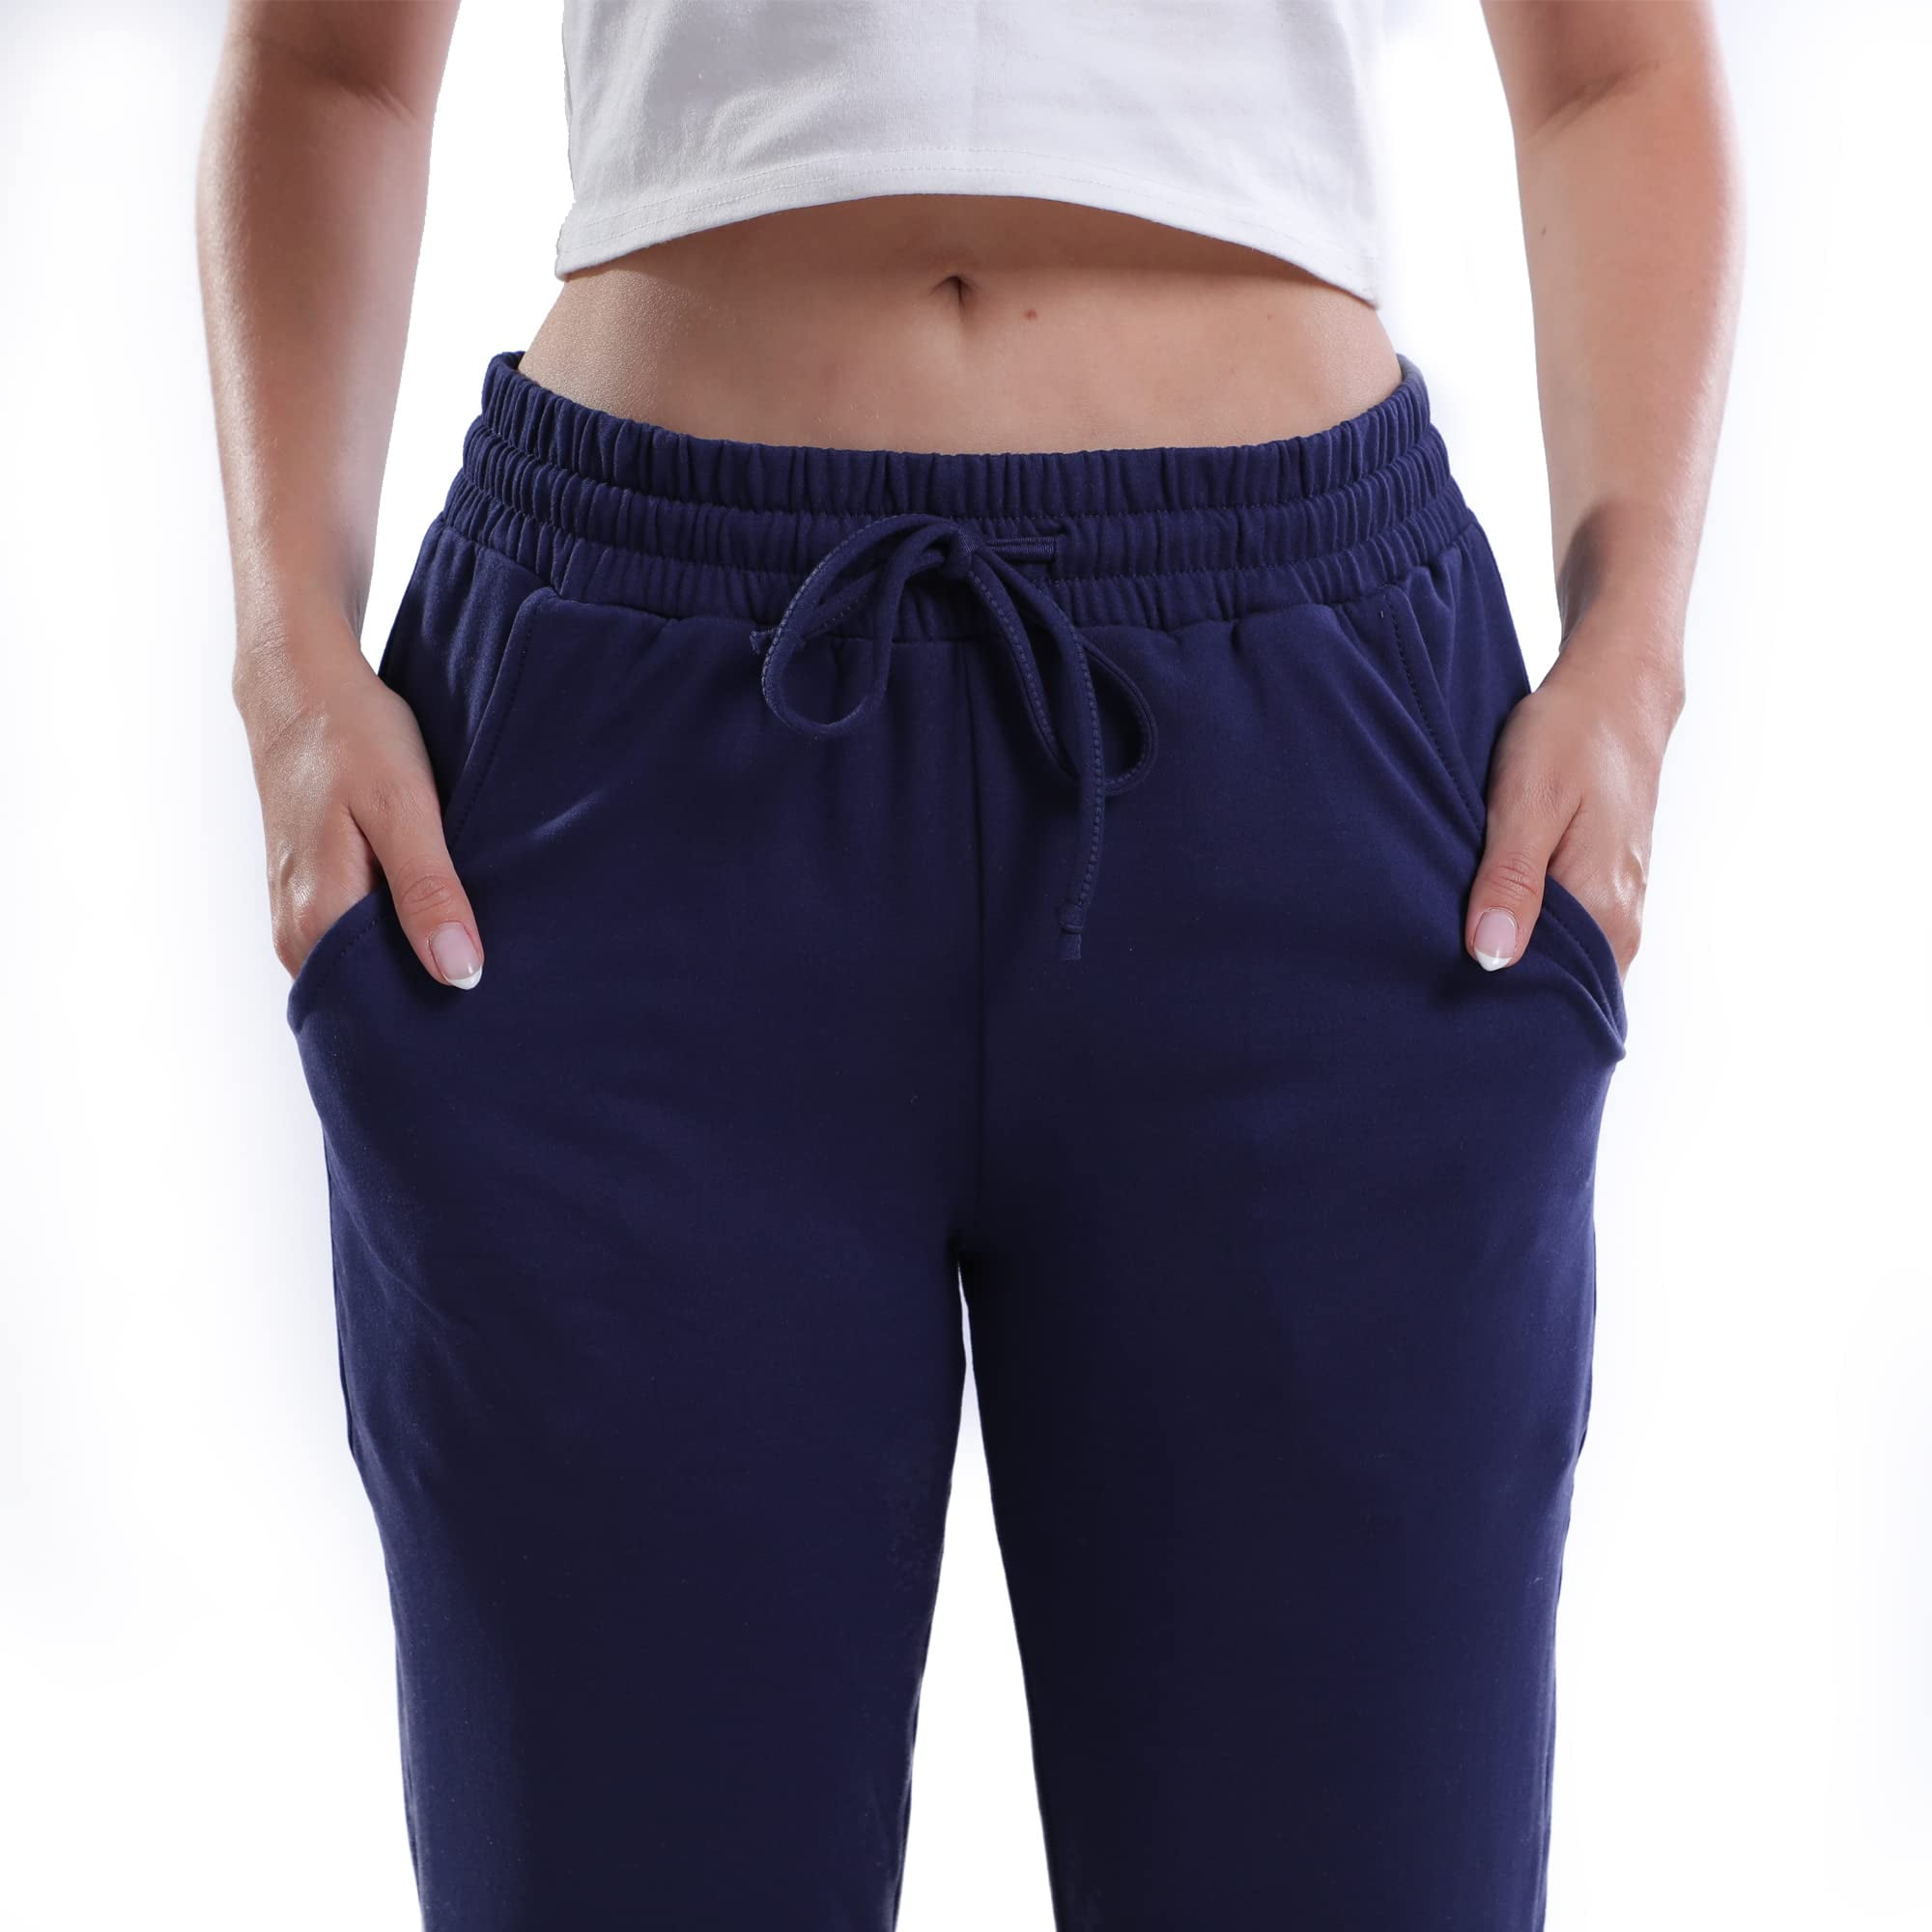 C Crush Joggers for Women with Pockets-Relaxed Fit Sweatpants